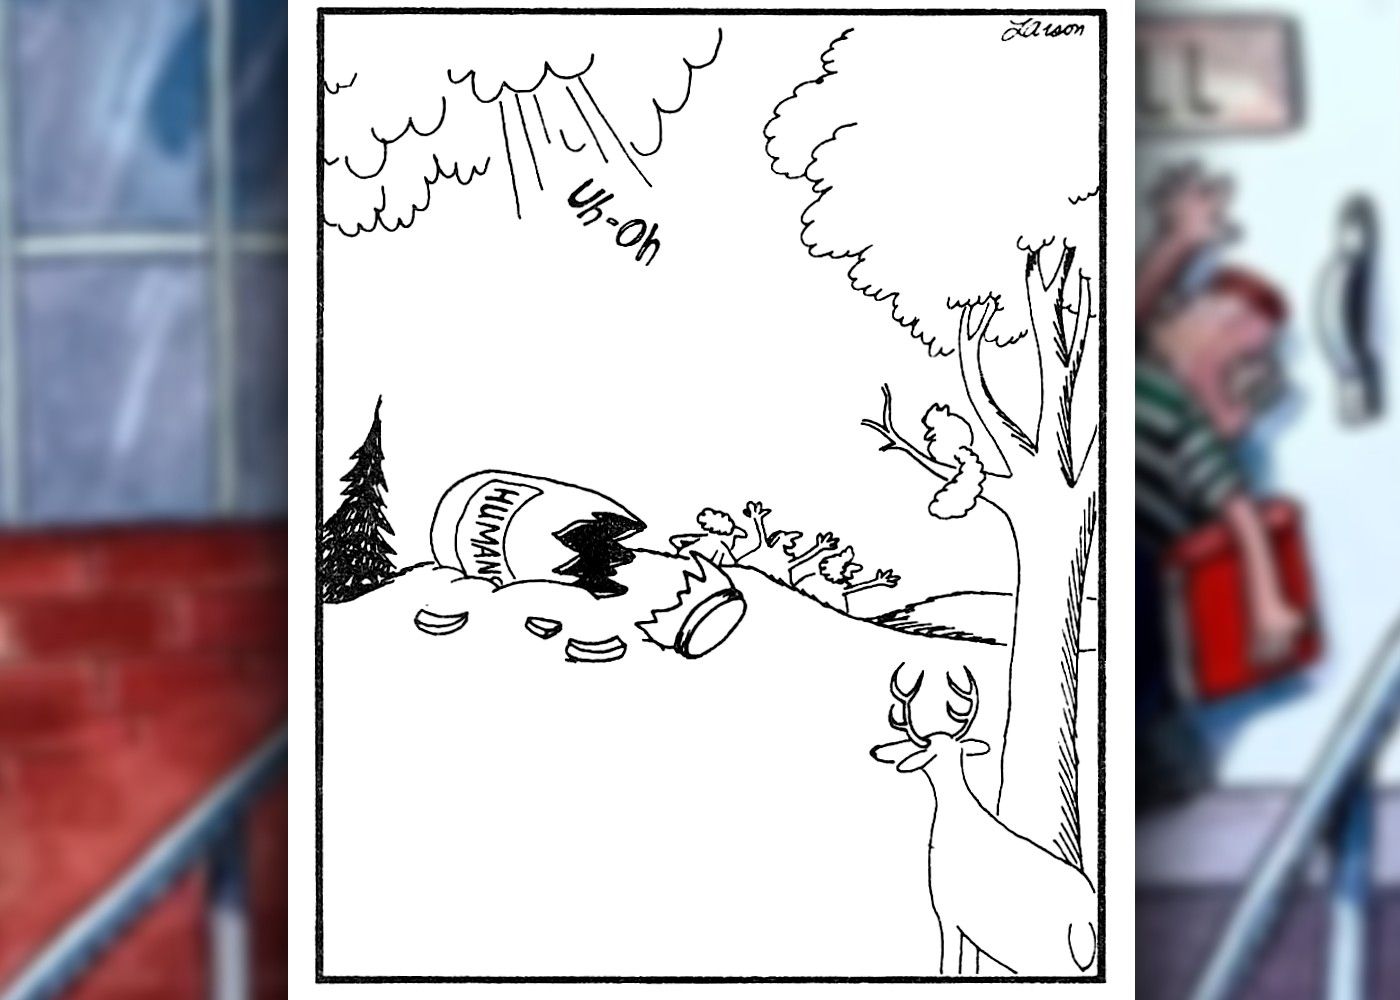 far side god accidentally drops his jar of humans to earth